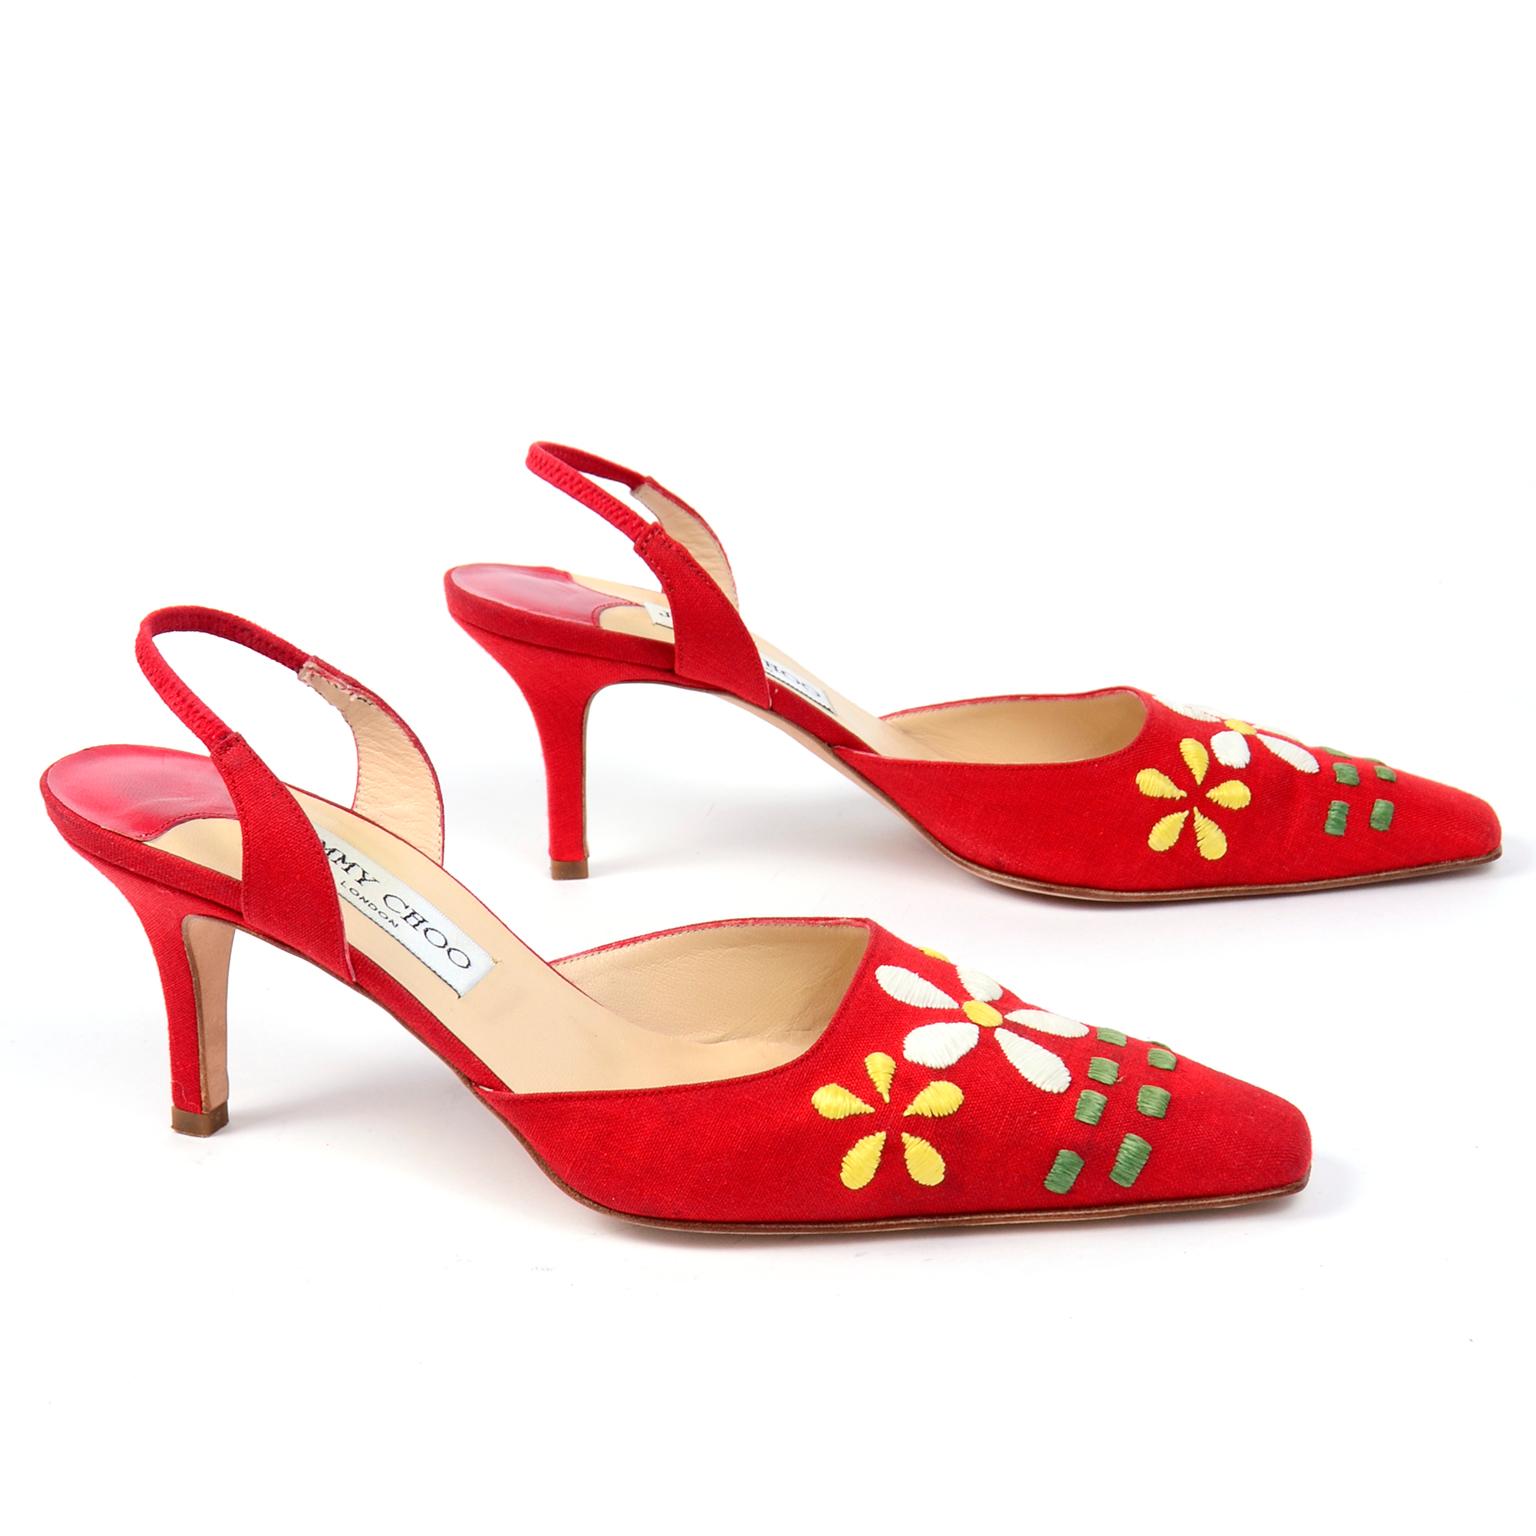 Red Linen Jimmy Choo Slingback Heel Shoes With Daisy Flowers 1